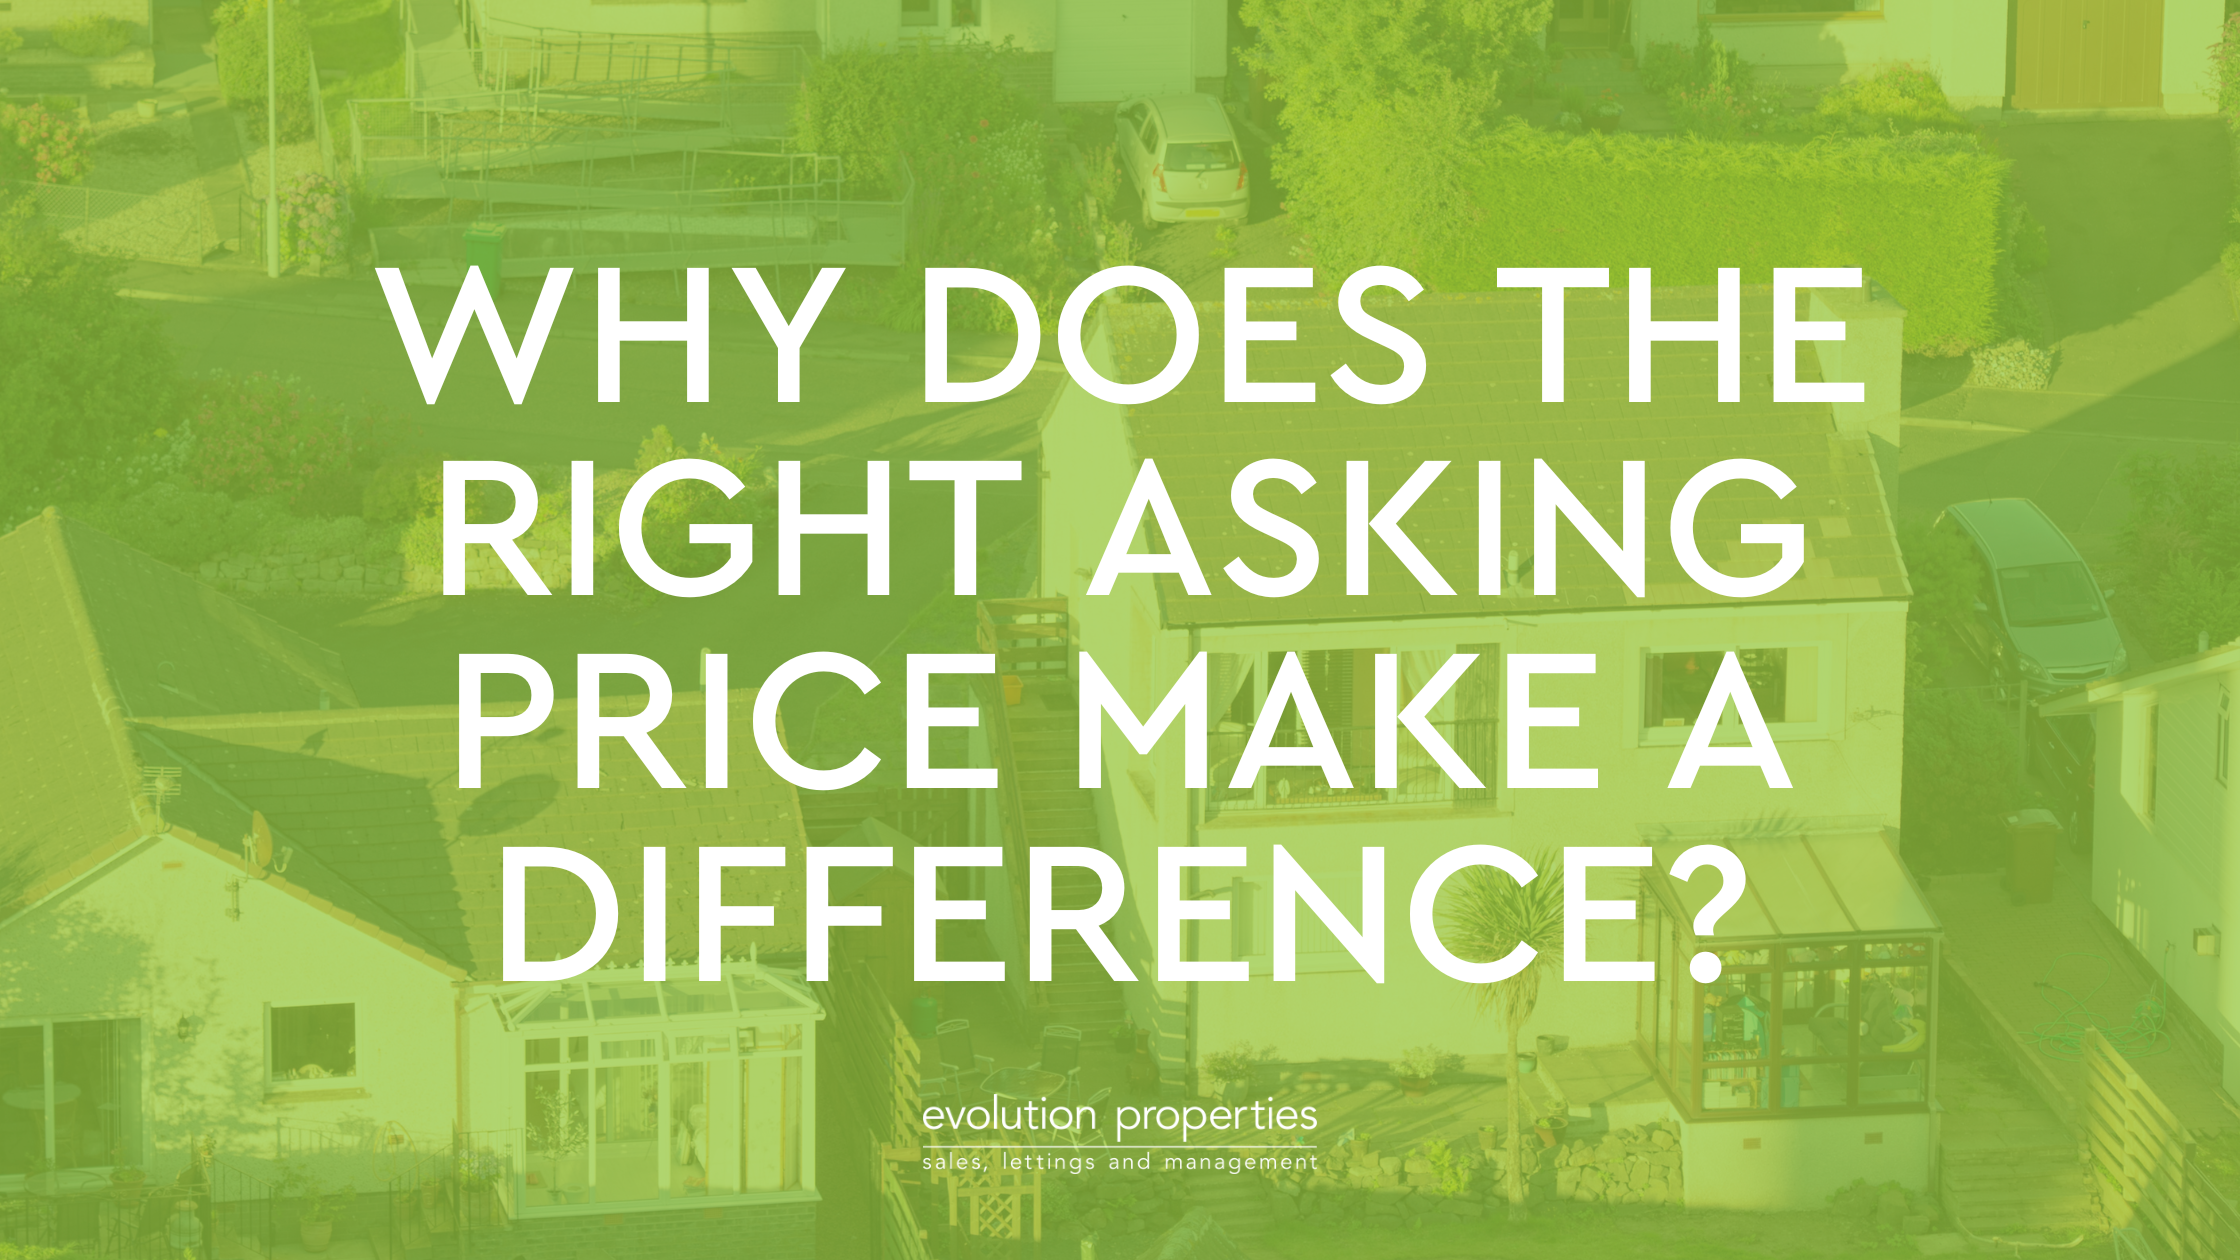 Why does the right asking price make a difference?